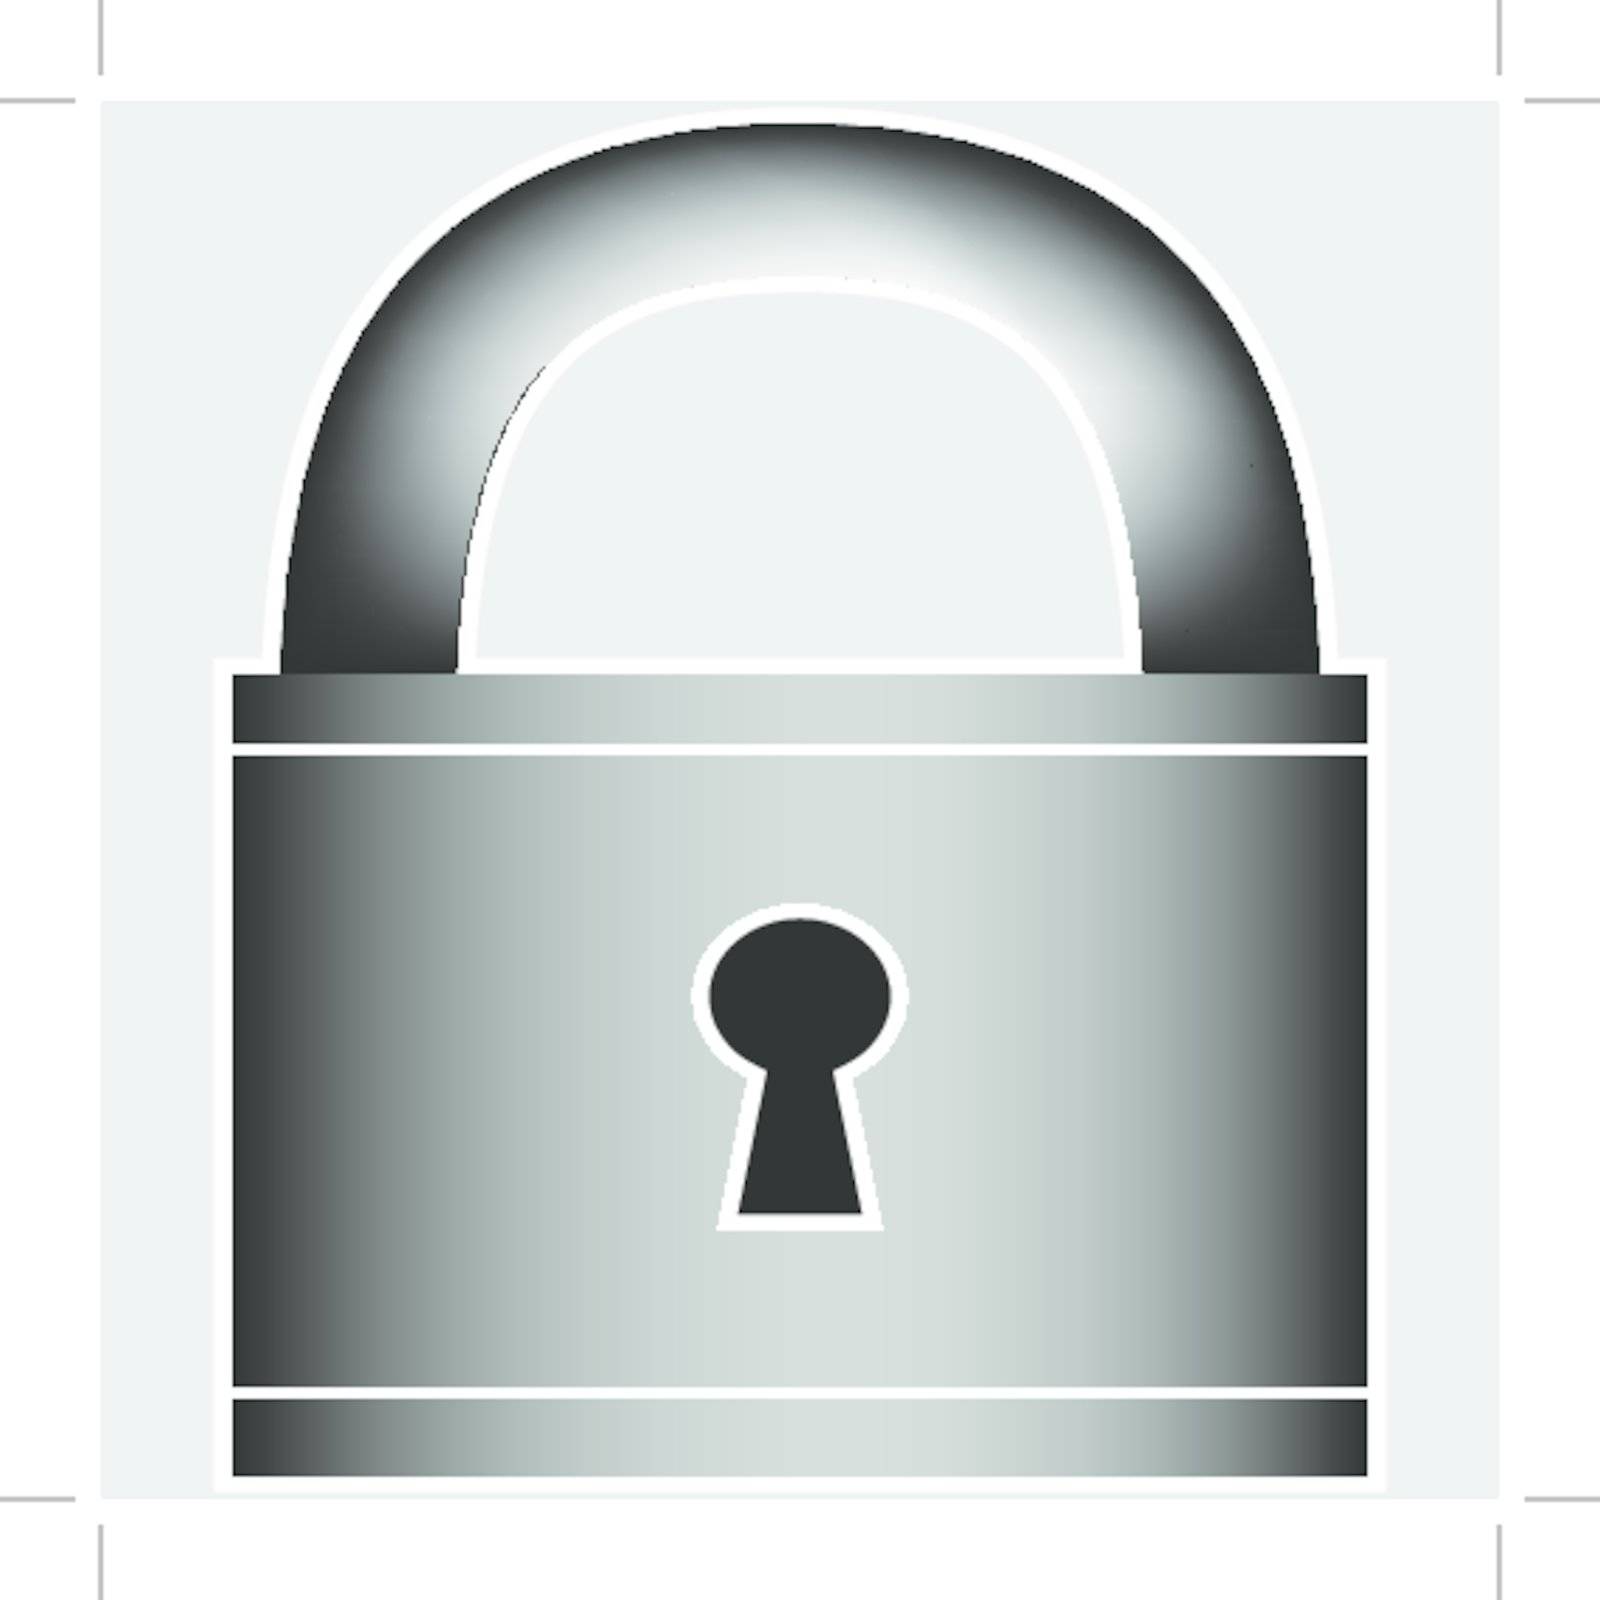 An image of a padlock security icon.